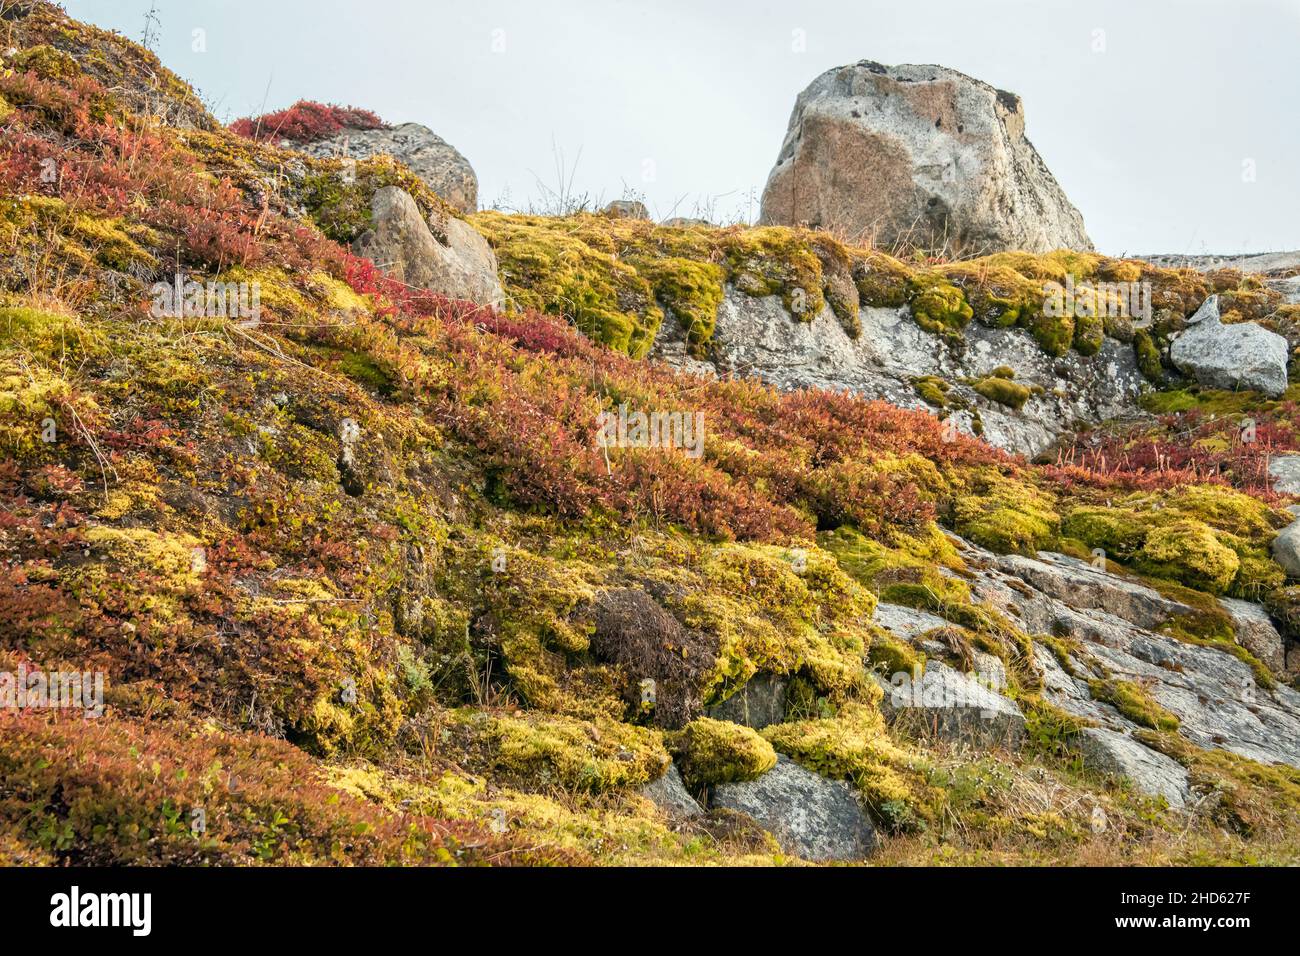 Diverse arctic plants on a south facing slope in late summer, Danmark O, Scoresby Sund, East Greenland Stock Photo